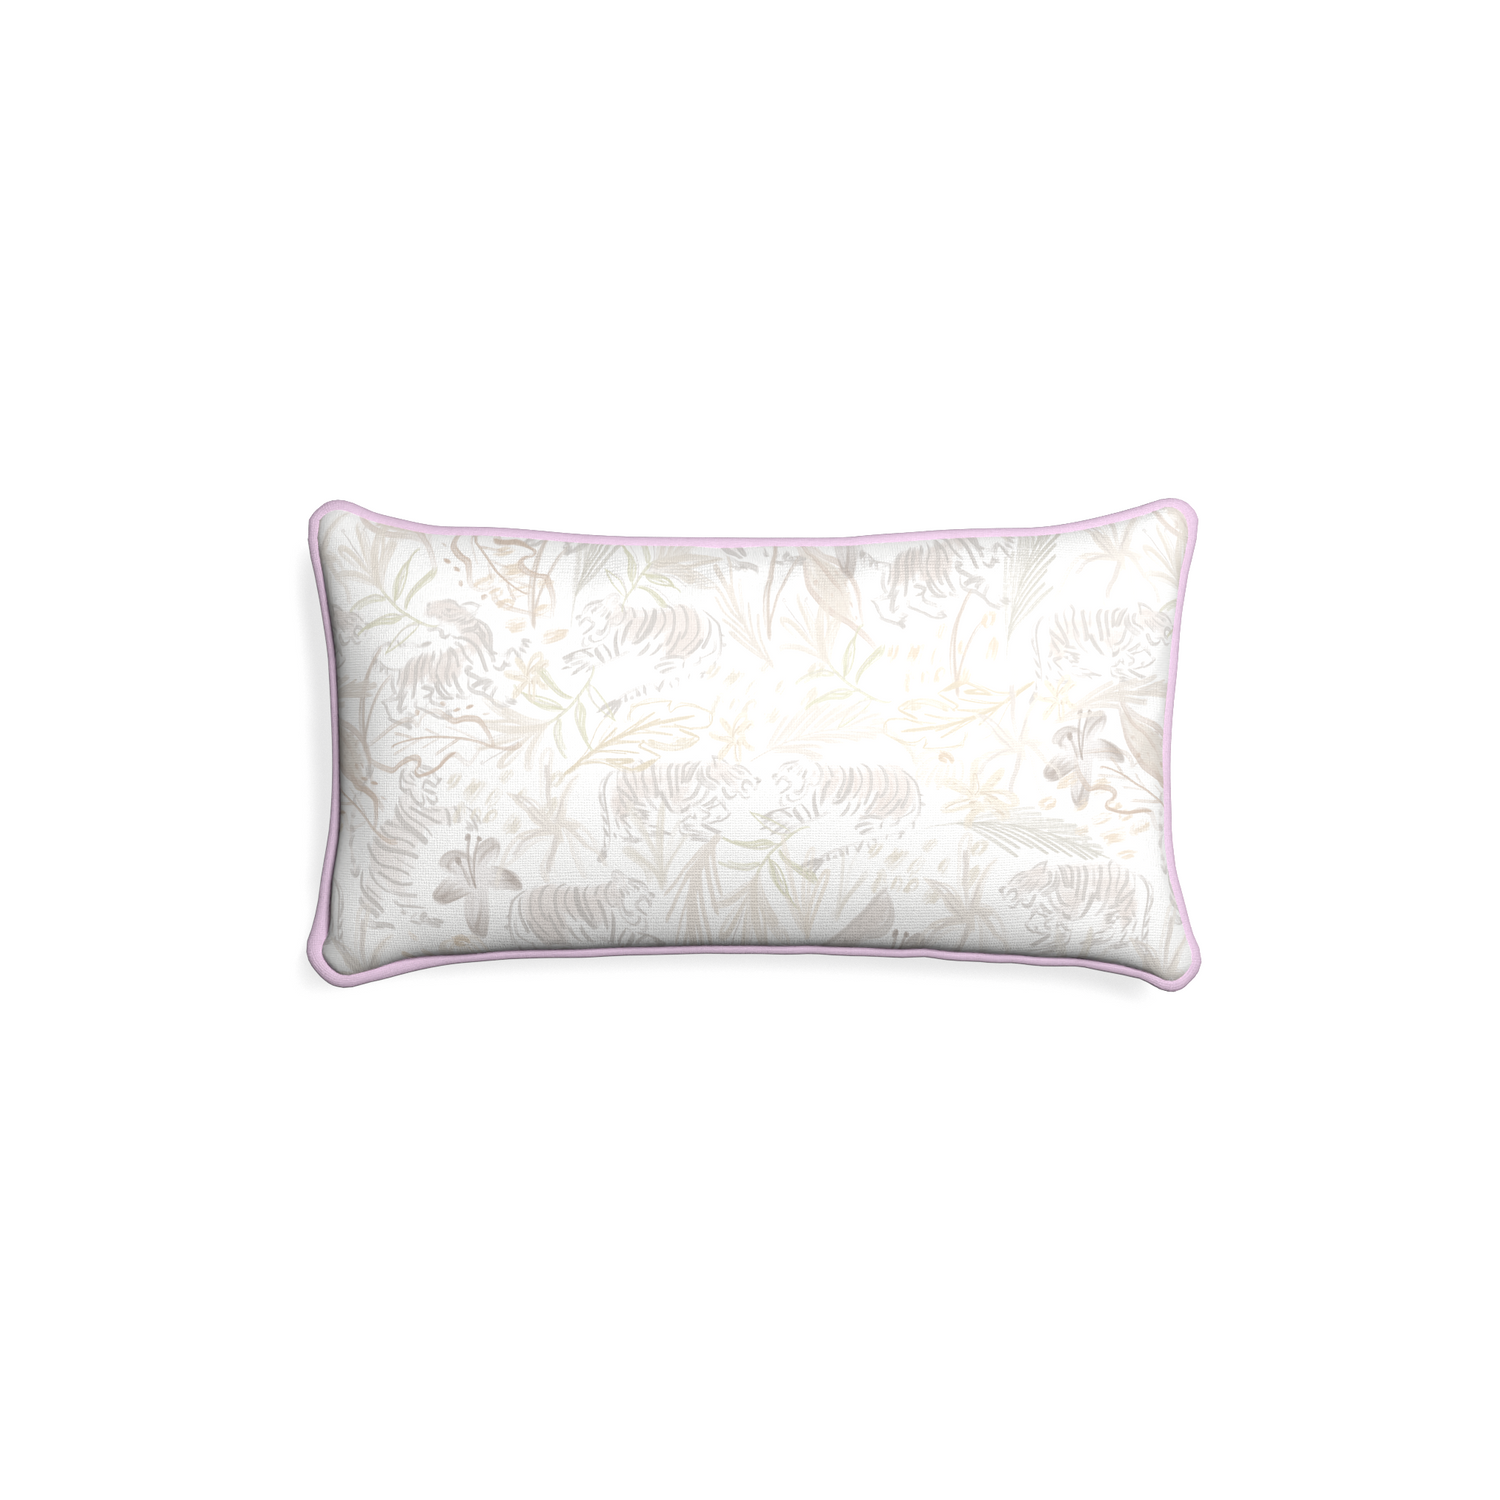 Petite-lumbar frida sand custom beige chinoiserie tigerpillow with l piping on white background